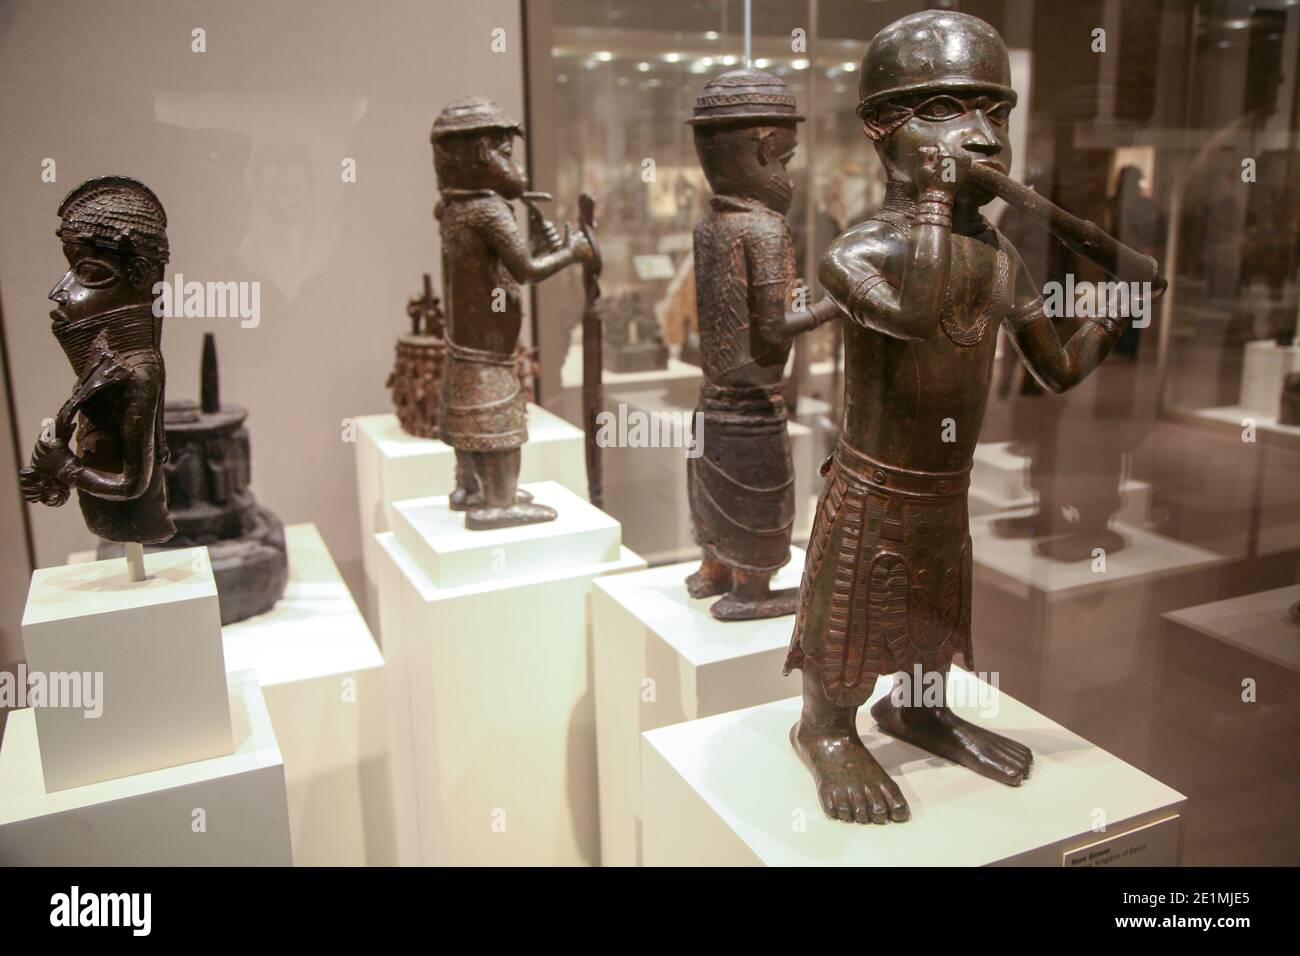 Benin bronzes originally from West Africa on display during exhibition at the British Museum, London, England Stock Photo